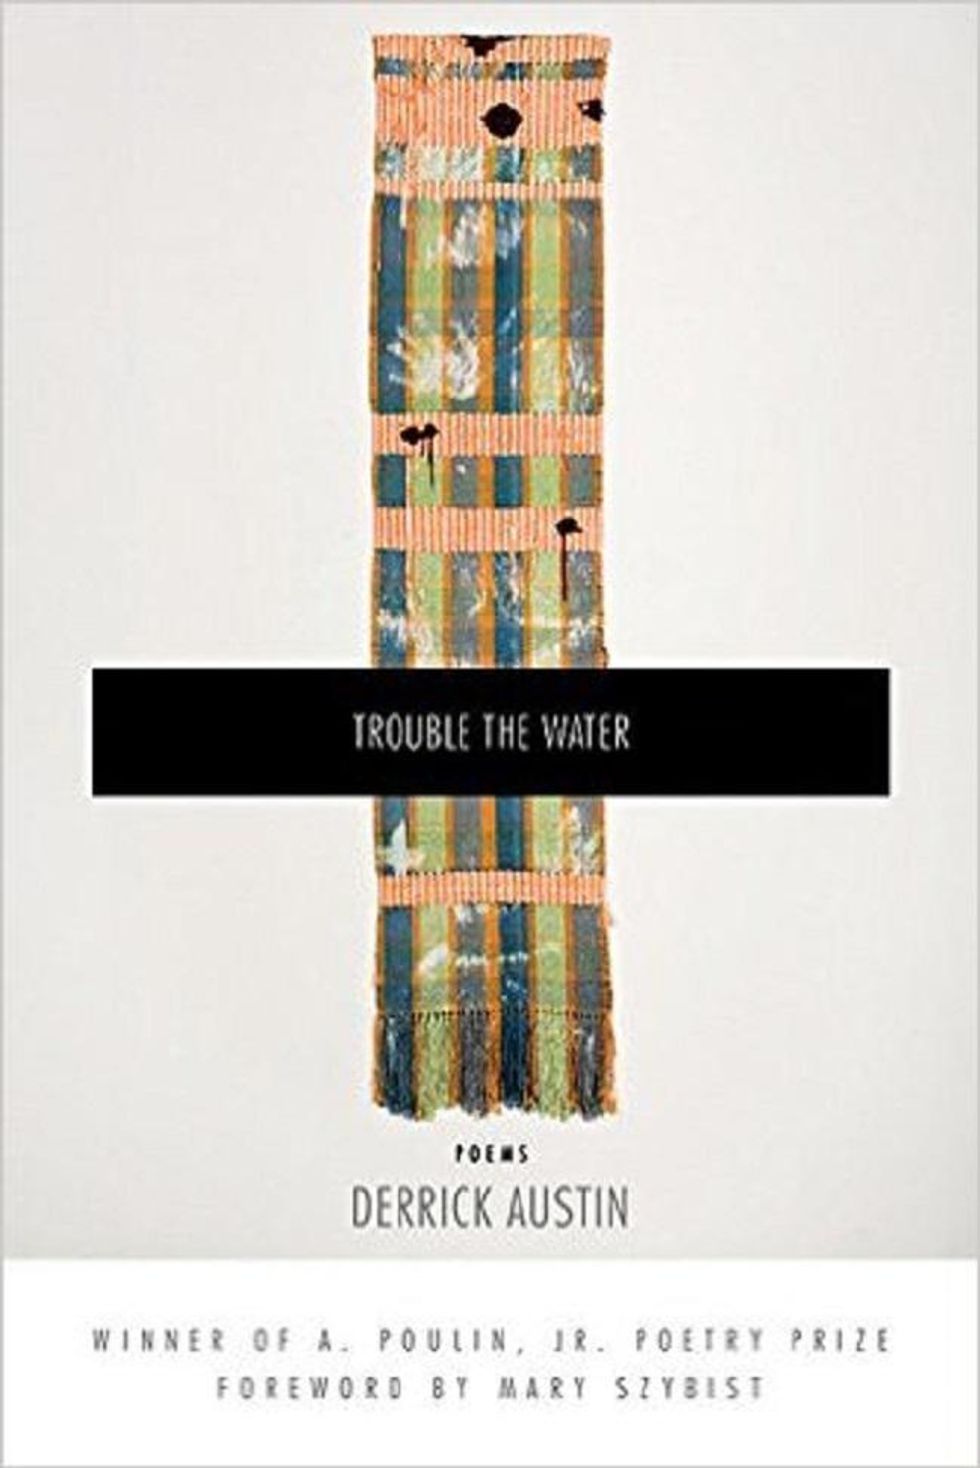 Trouble the Water by Derrick Austin